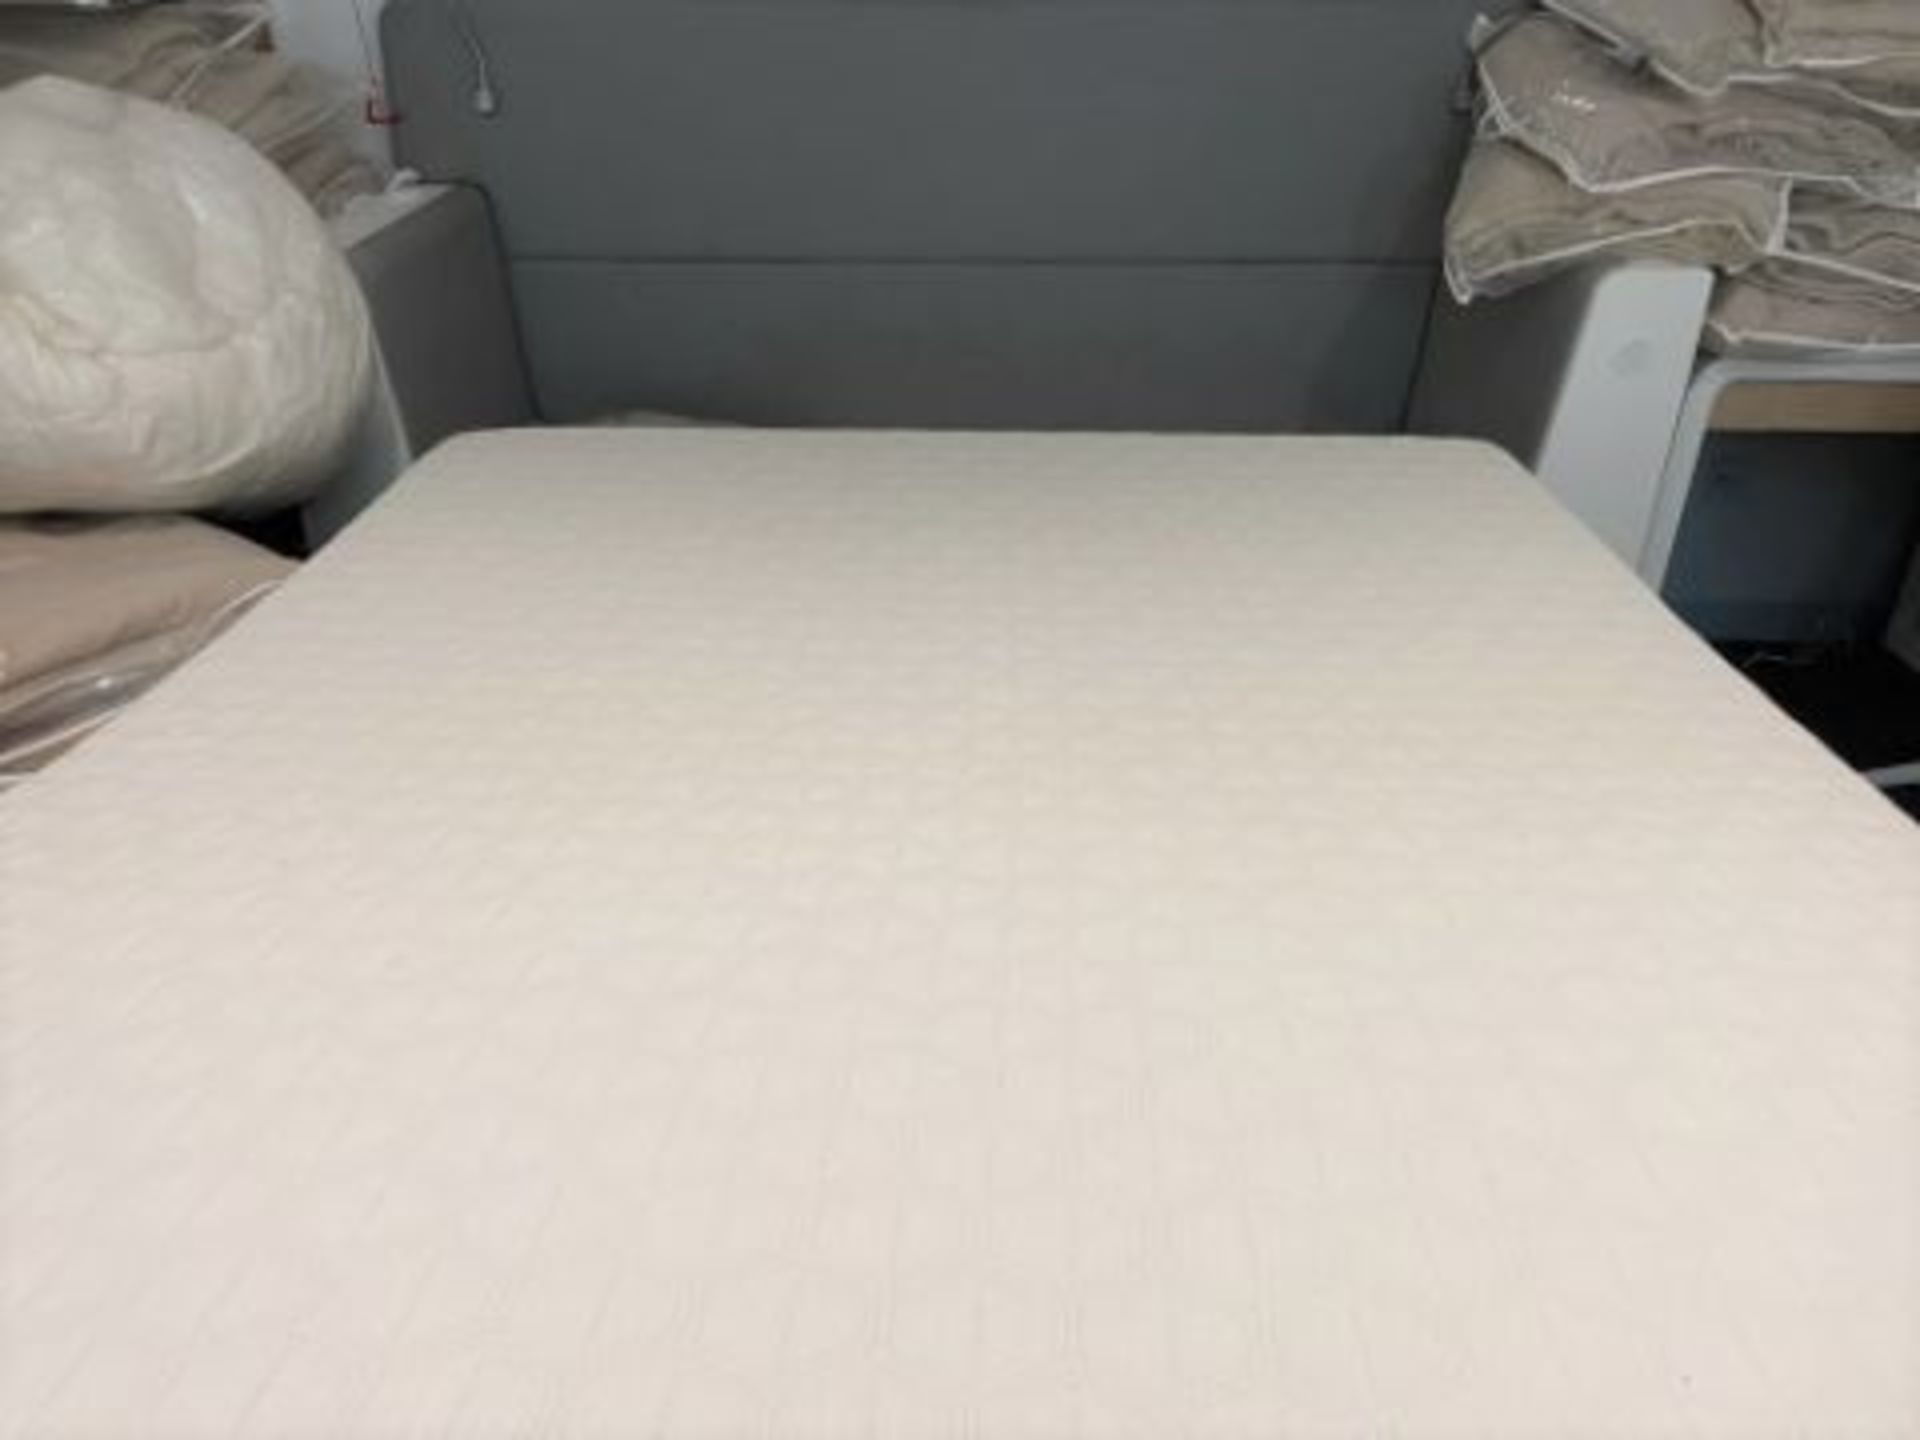 1 x Double Adjustable Space Saving Smart Bed With Serta Motion Memory Foam Mattress - Signature - Image 5 of 11